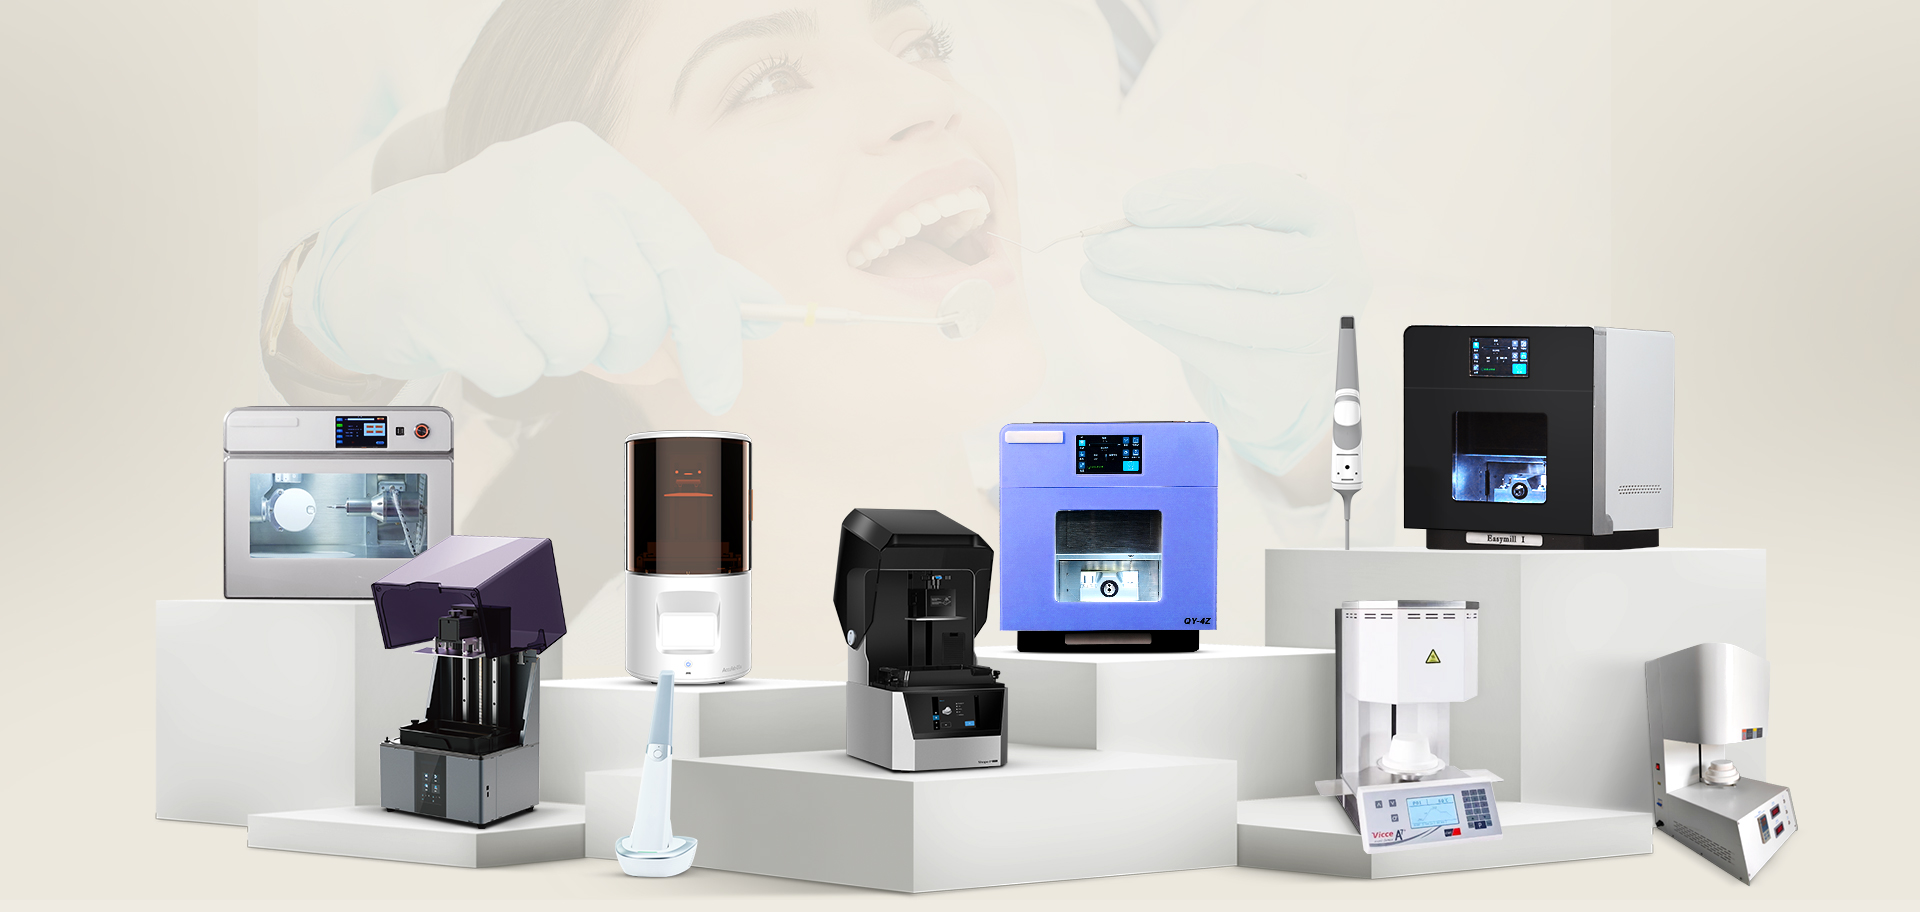 Intraoral Scanning, Chairside Milling, Sintering and 3D Printing for Dental CAD/CAM Complete Solution